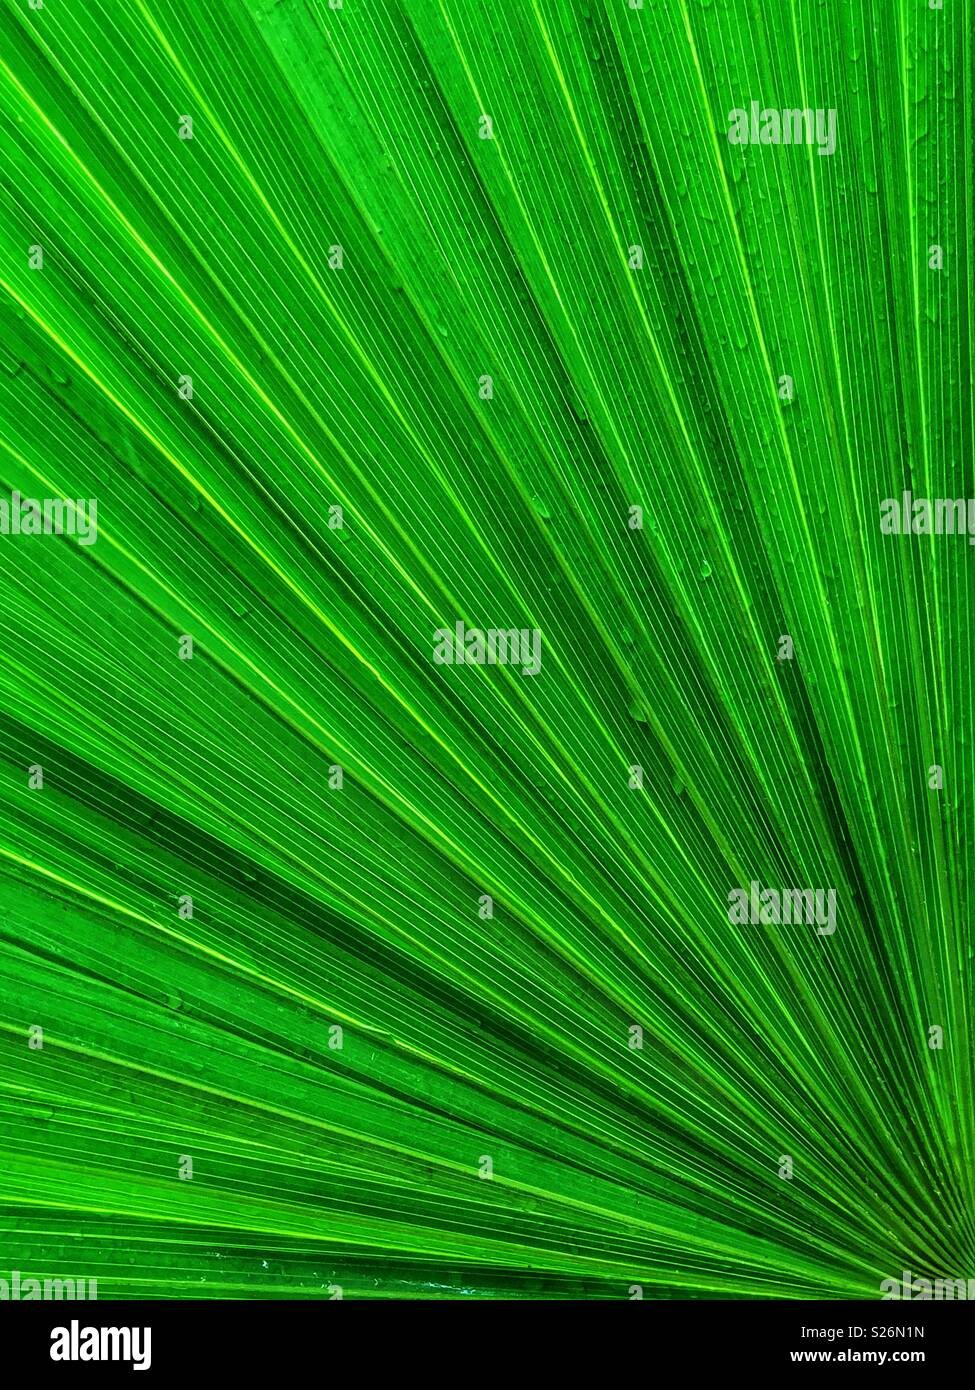 Vibrant green palm leaf with raindrops. Stock Photo